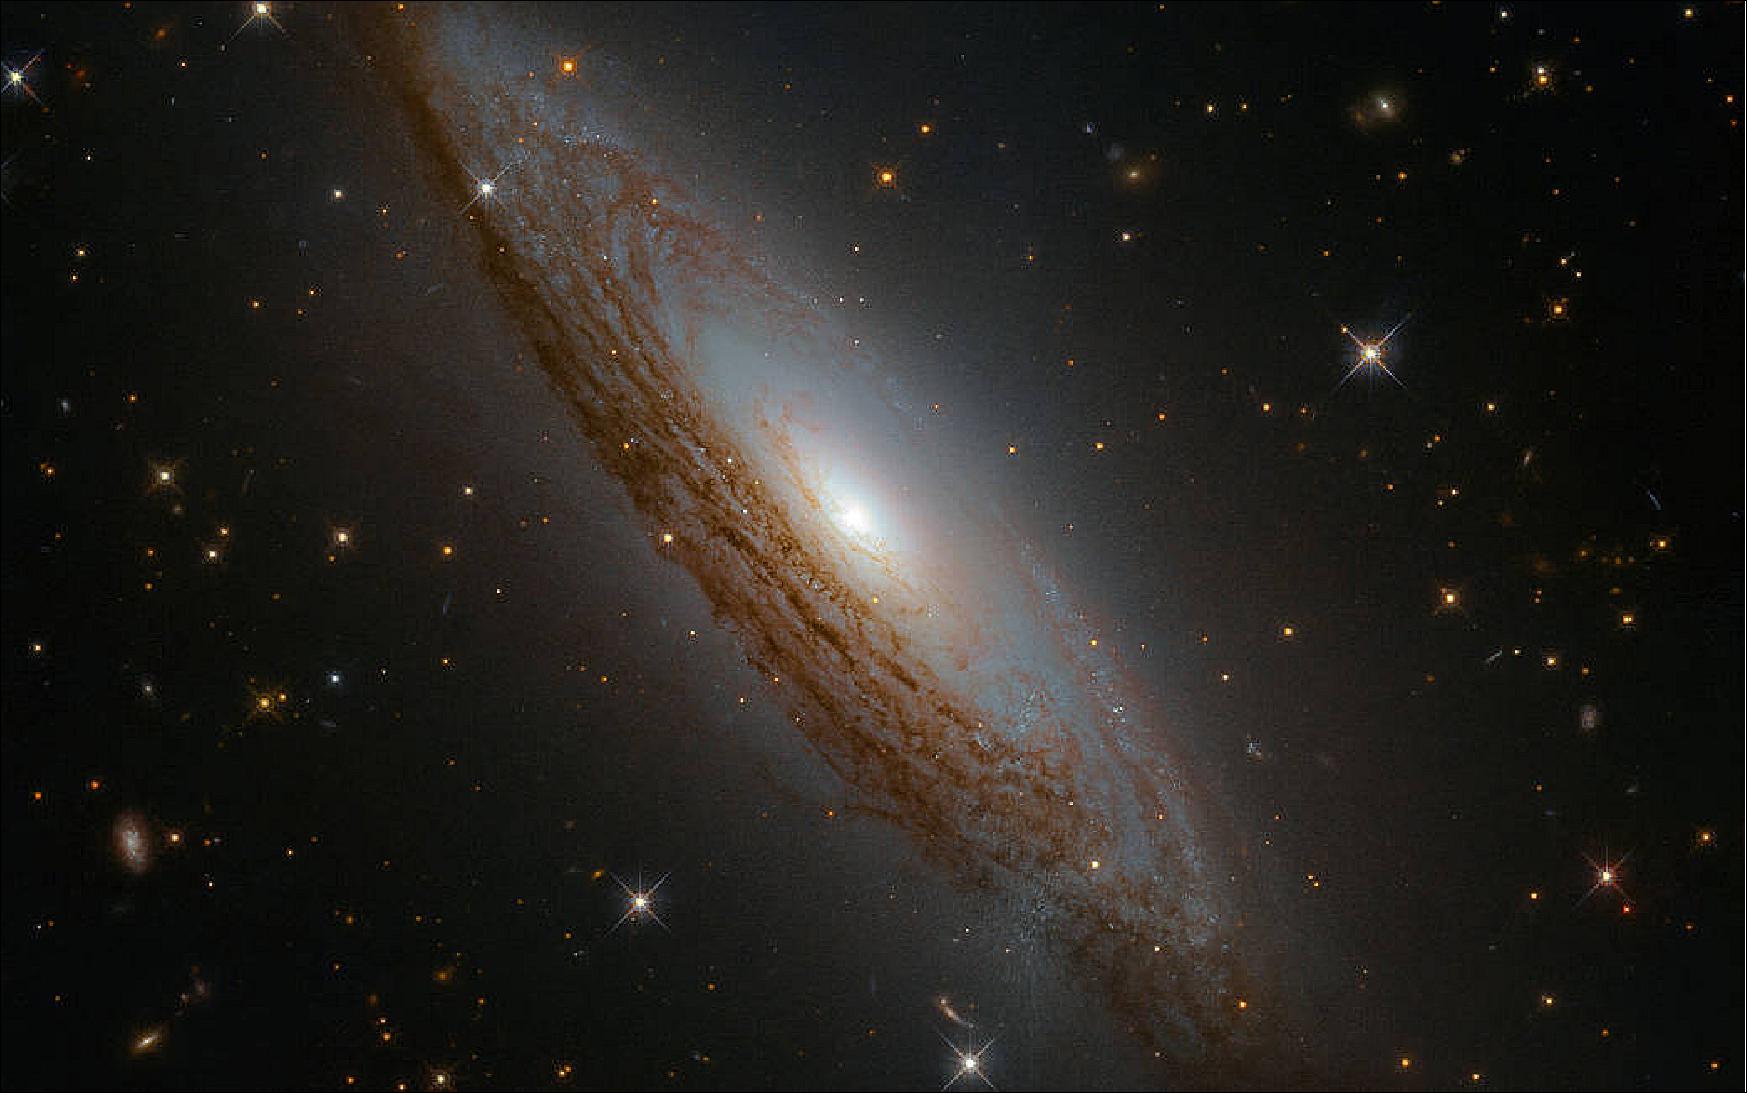 Figure 1: This galaxy has something known as an active galactic nucleus. While this phrase sounds complex, this simply means that astronomers measure a lot of radiation at all wavelengths coming from the center of the galaxy. This radiation is generated by material falling inward into the very central region of ESO 021-G004, and meeting the behemoth lurking there — a supermassive black hole. As material falls toward this black hole it is dragged into orbit as part of an accretion disk; it becomes superheated as it swirls around and around, emitting characteristic high-energy radiation until it is eventually devoured. The data comprising this image were gathered by the Wide Field Camera 3 aboard the NASA/ESA Hubble Space Telescope (image credit: ESA/Hubble & NASA, D. Rosario et al.)